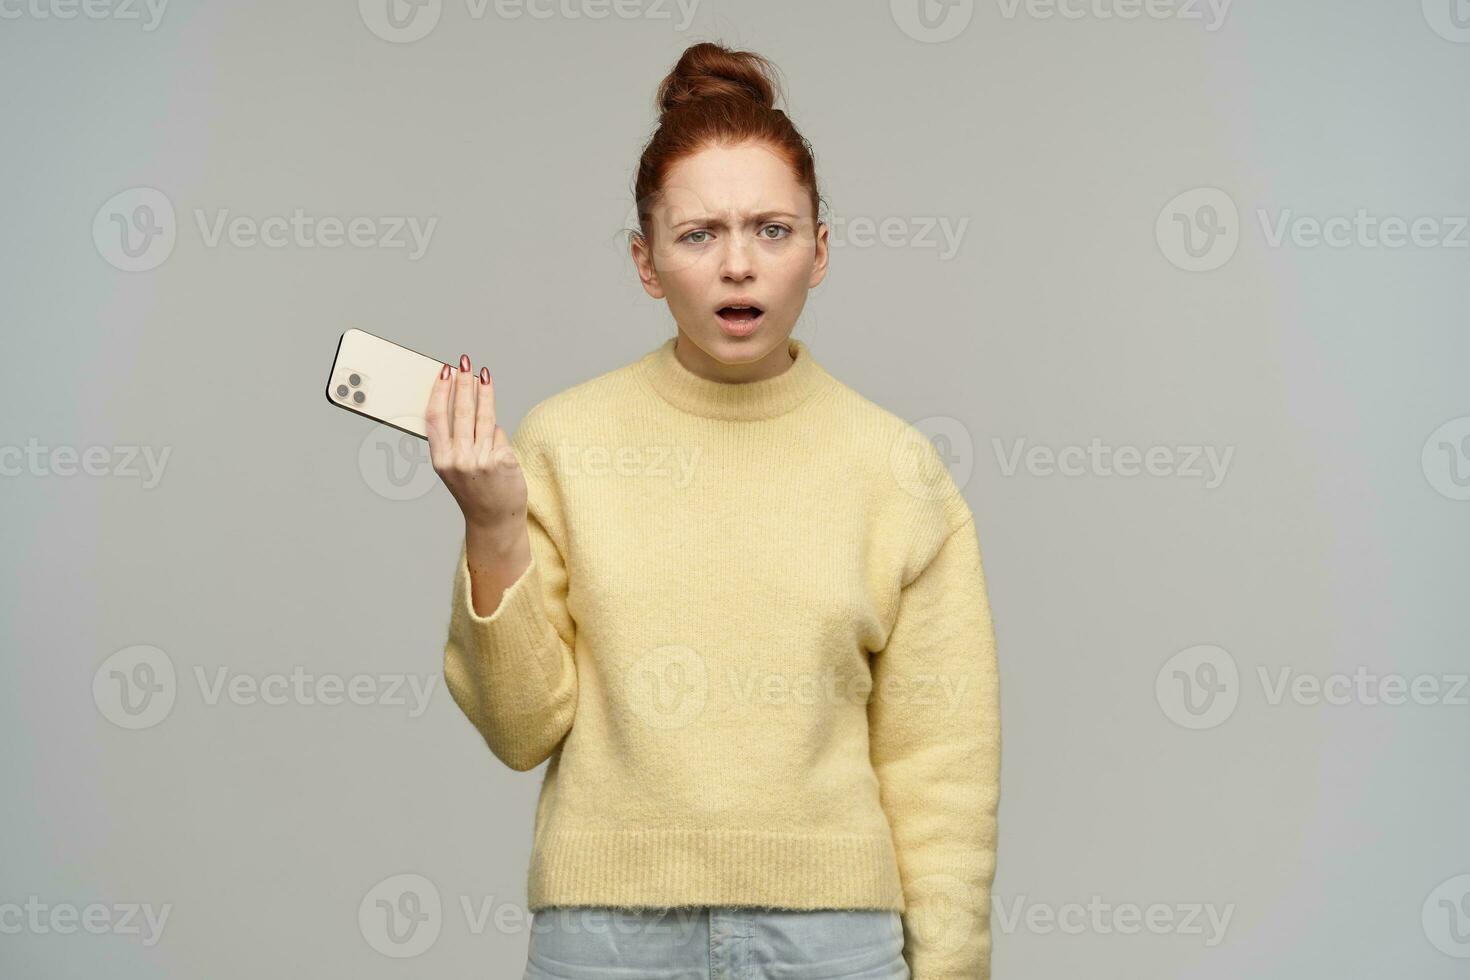 Confused lady, disconnected woman with ginger hair bun. Wearing yellow sweater and holding a smartphone. Frowning her face, bothered. Watching at the camera, isolated over grey background photo